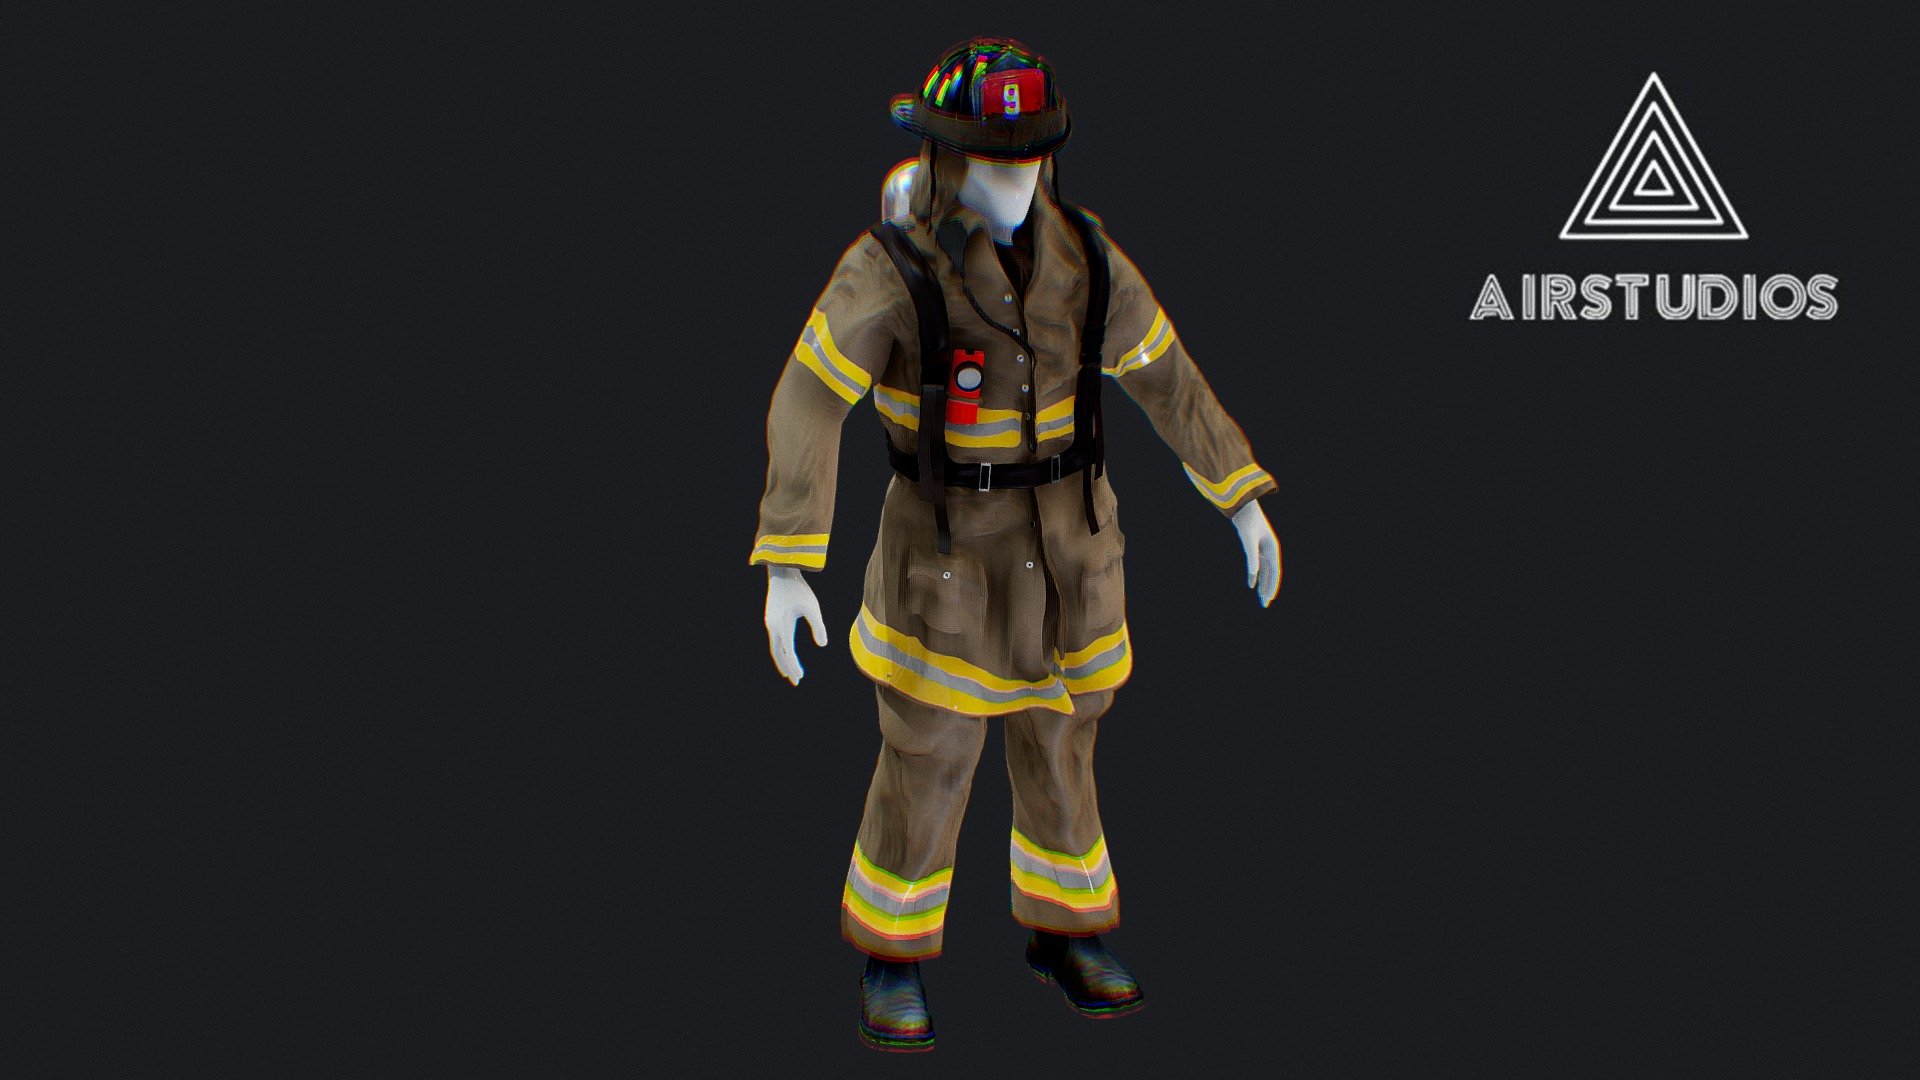 New York City Firefighter Uniform

Made in Blender - New York City Firefighter Uniform - Buy Royalty Free 3D model by AirStudios (@sebbe613) 3d model